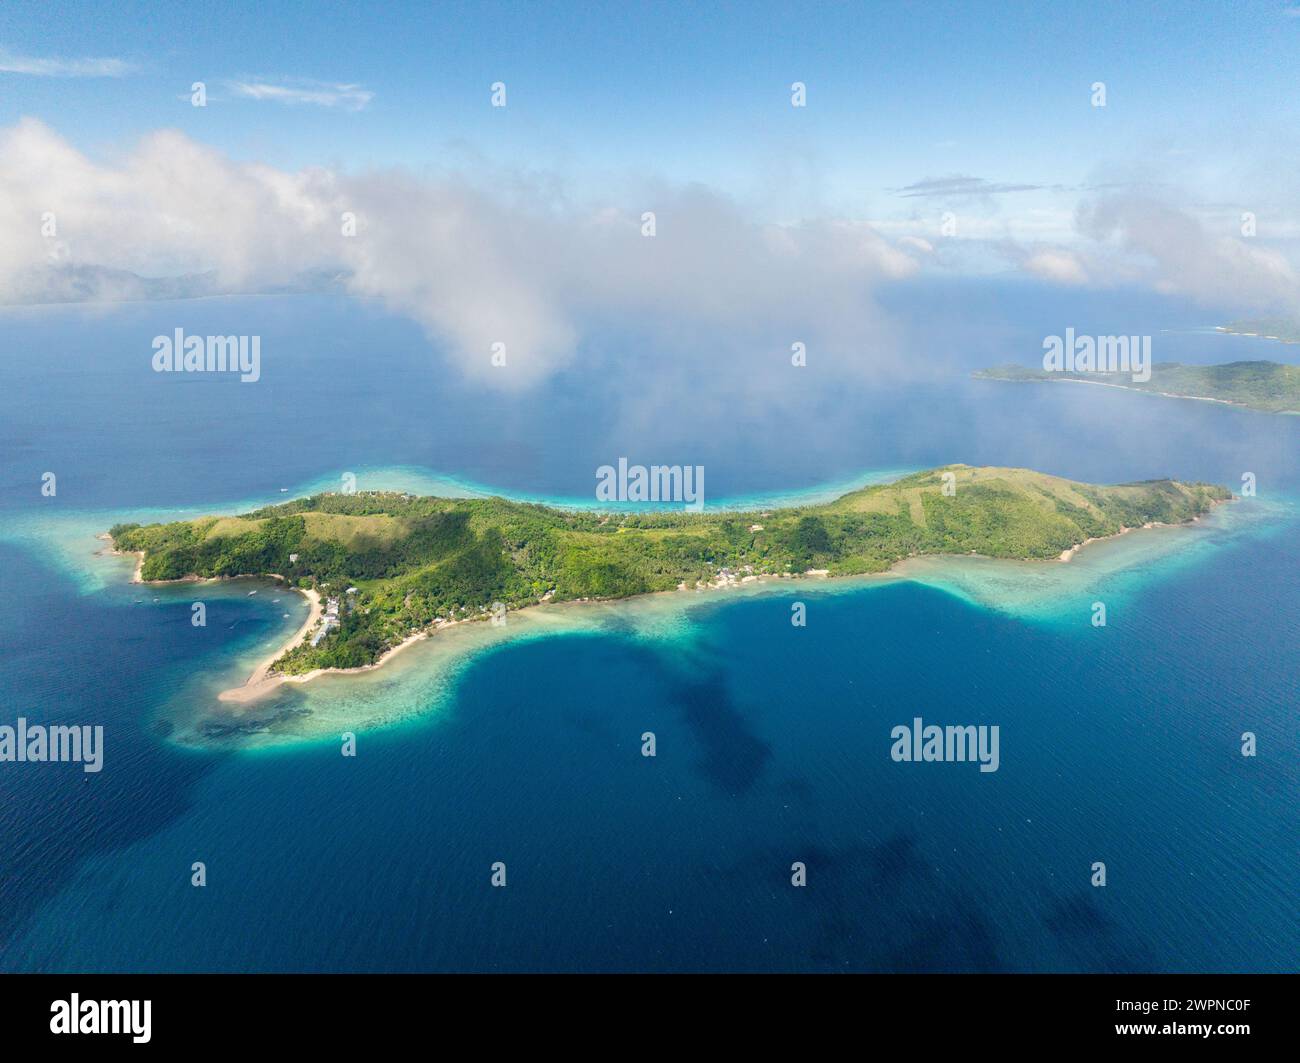 Clouds over the Logbon Island surrounded by blue sea. Romblon, Philippines. Stock Photo